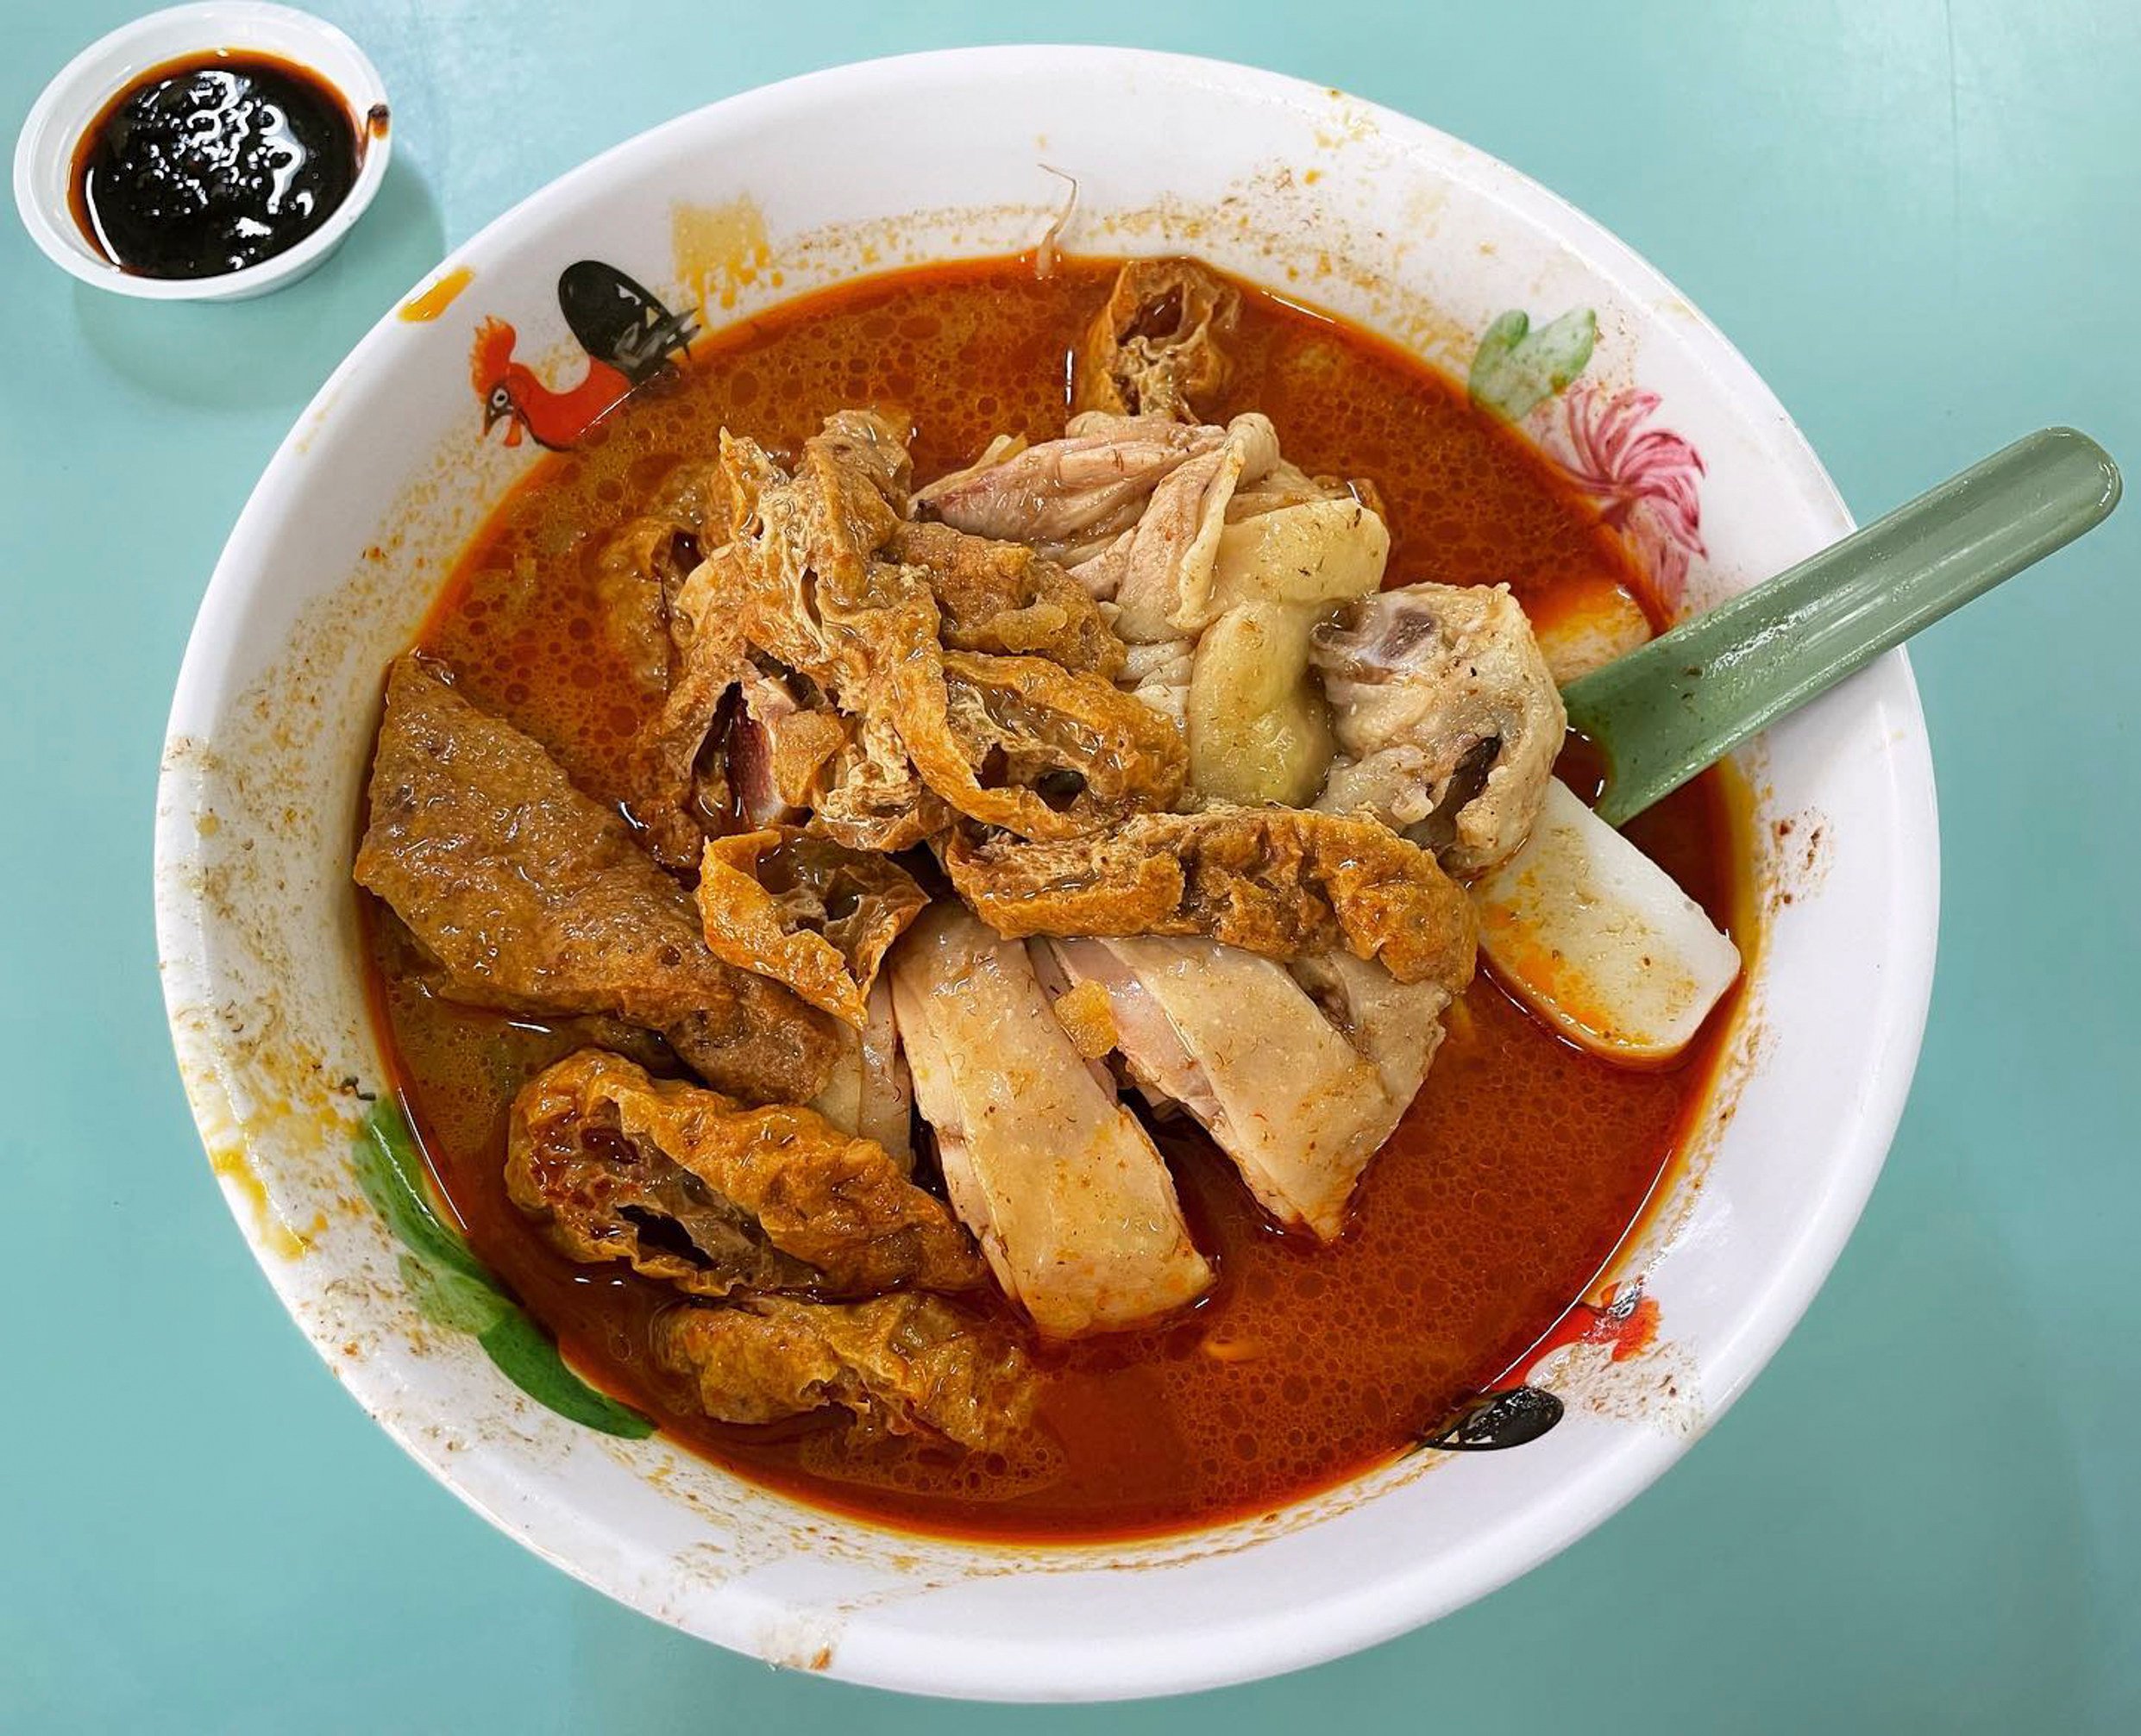 Chicken curry noodles from Hong Lim Market & Food Centre’s Heng Kee. It is one of 17 hawker stalls that have been newly awarded a Bib Gourmand in the Michelin Guide Singapore 2023. Photo: Instagram/@lordq14